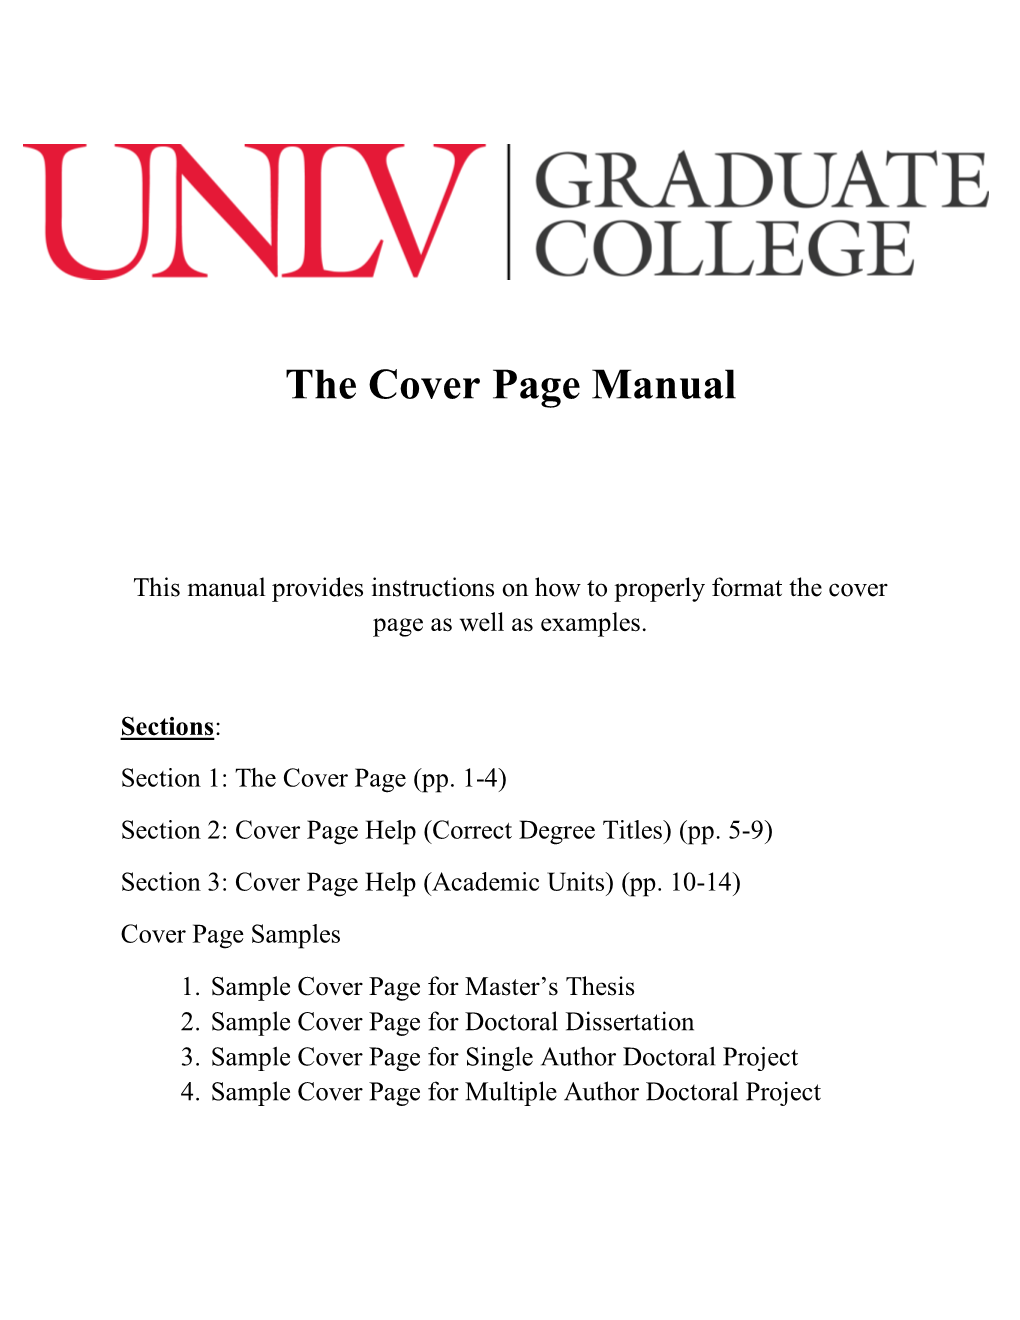 The Cover Page Manual